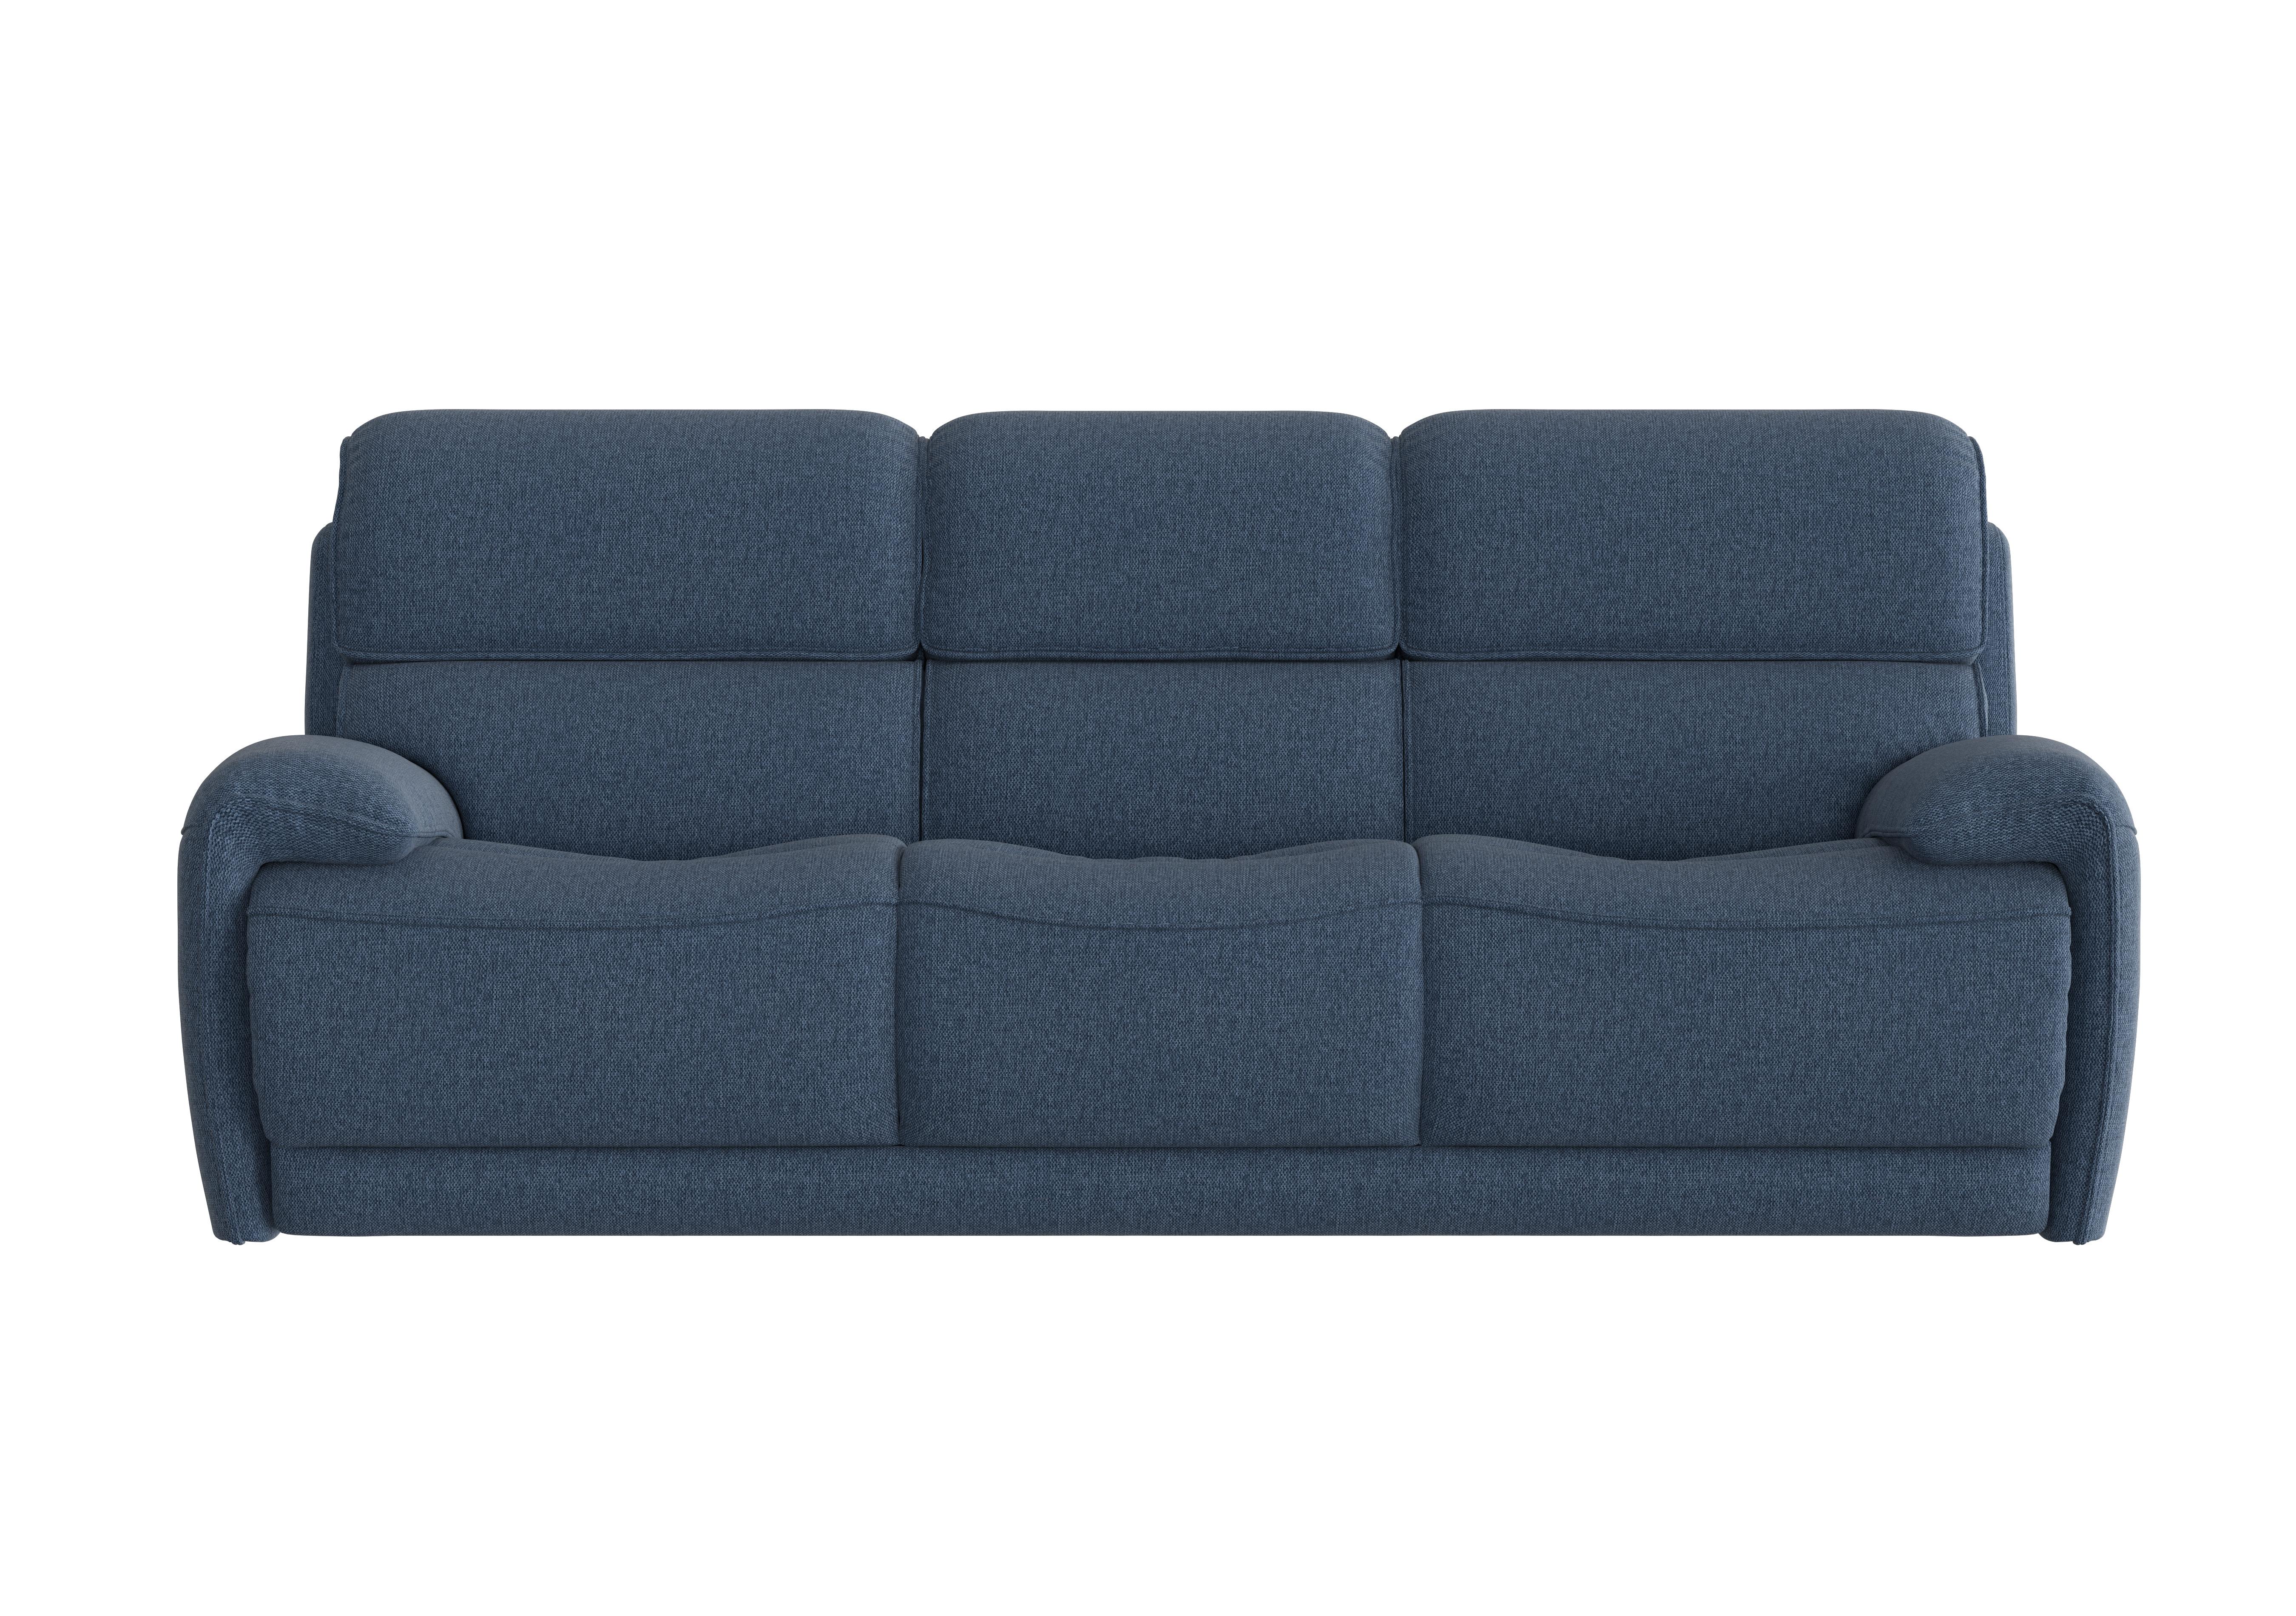 Link 3 Seater Fabric Sofa in Fab-Blt-R38 Blue on Furniture Village